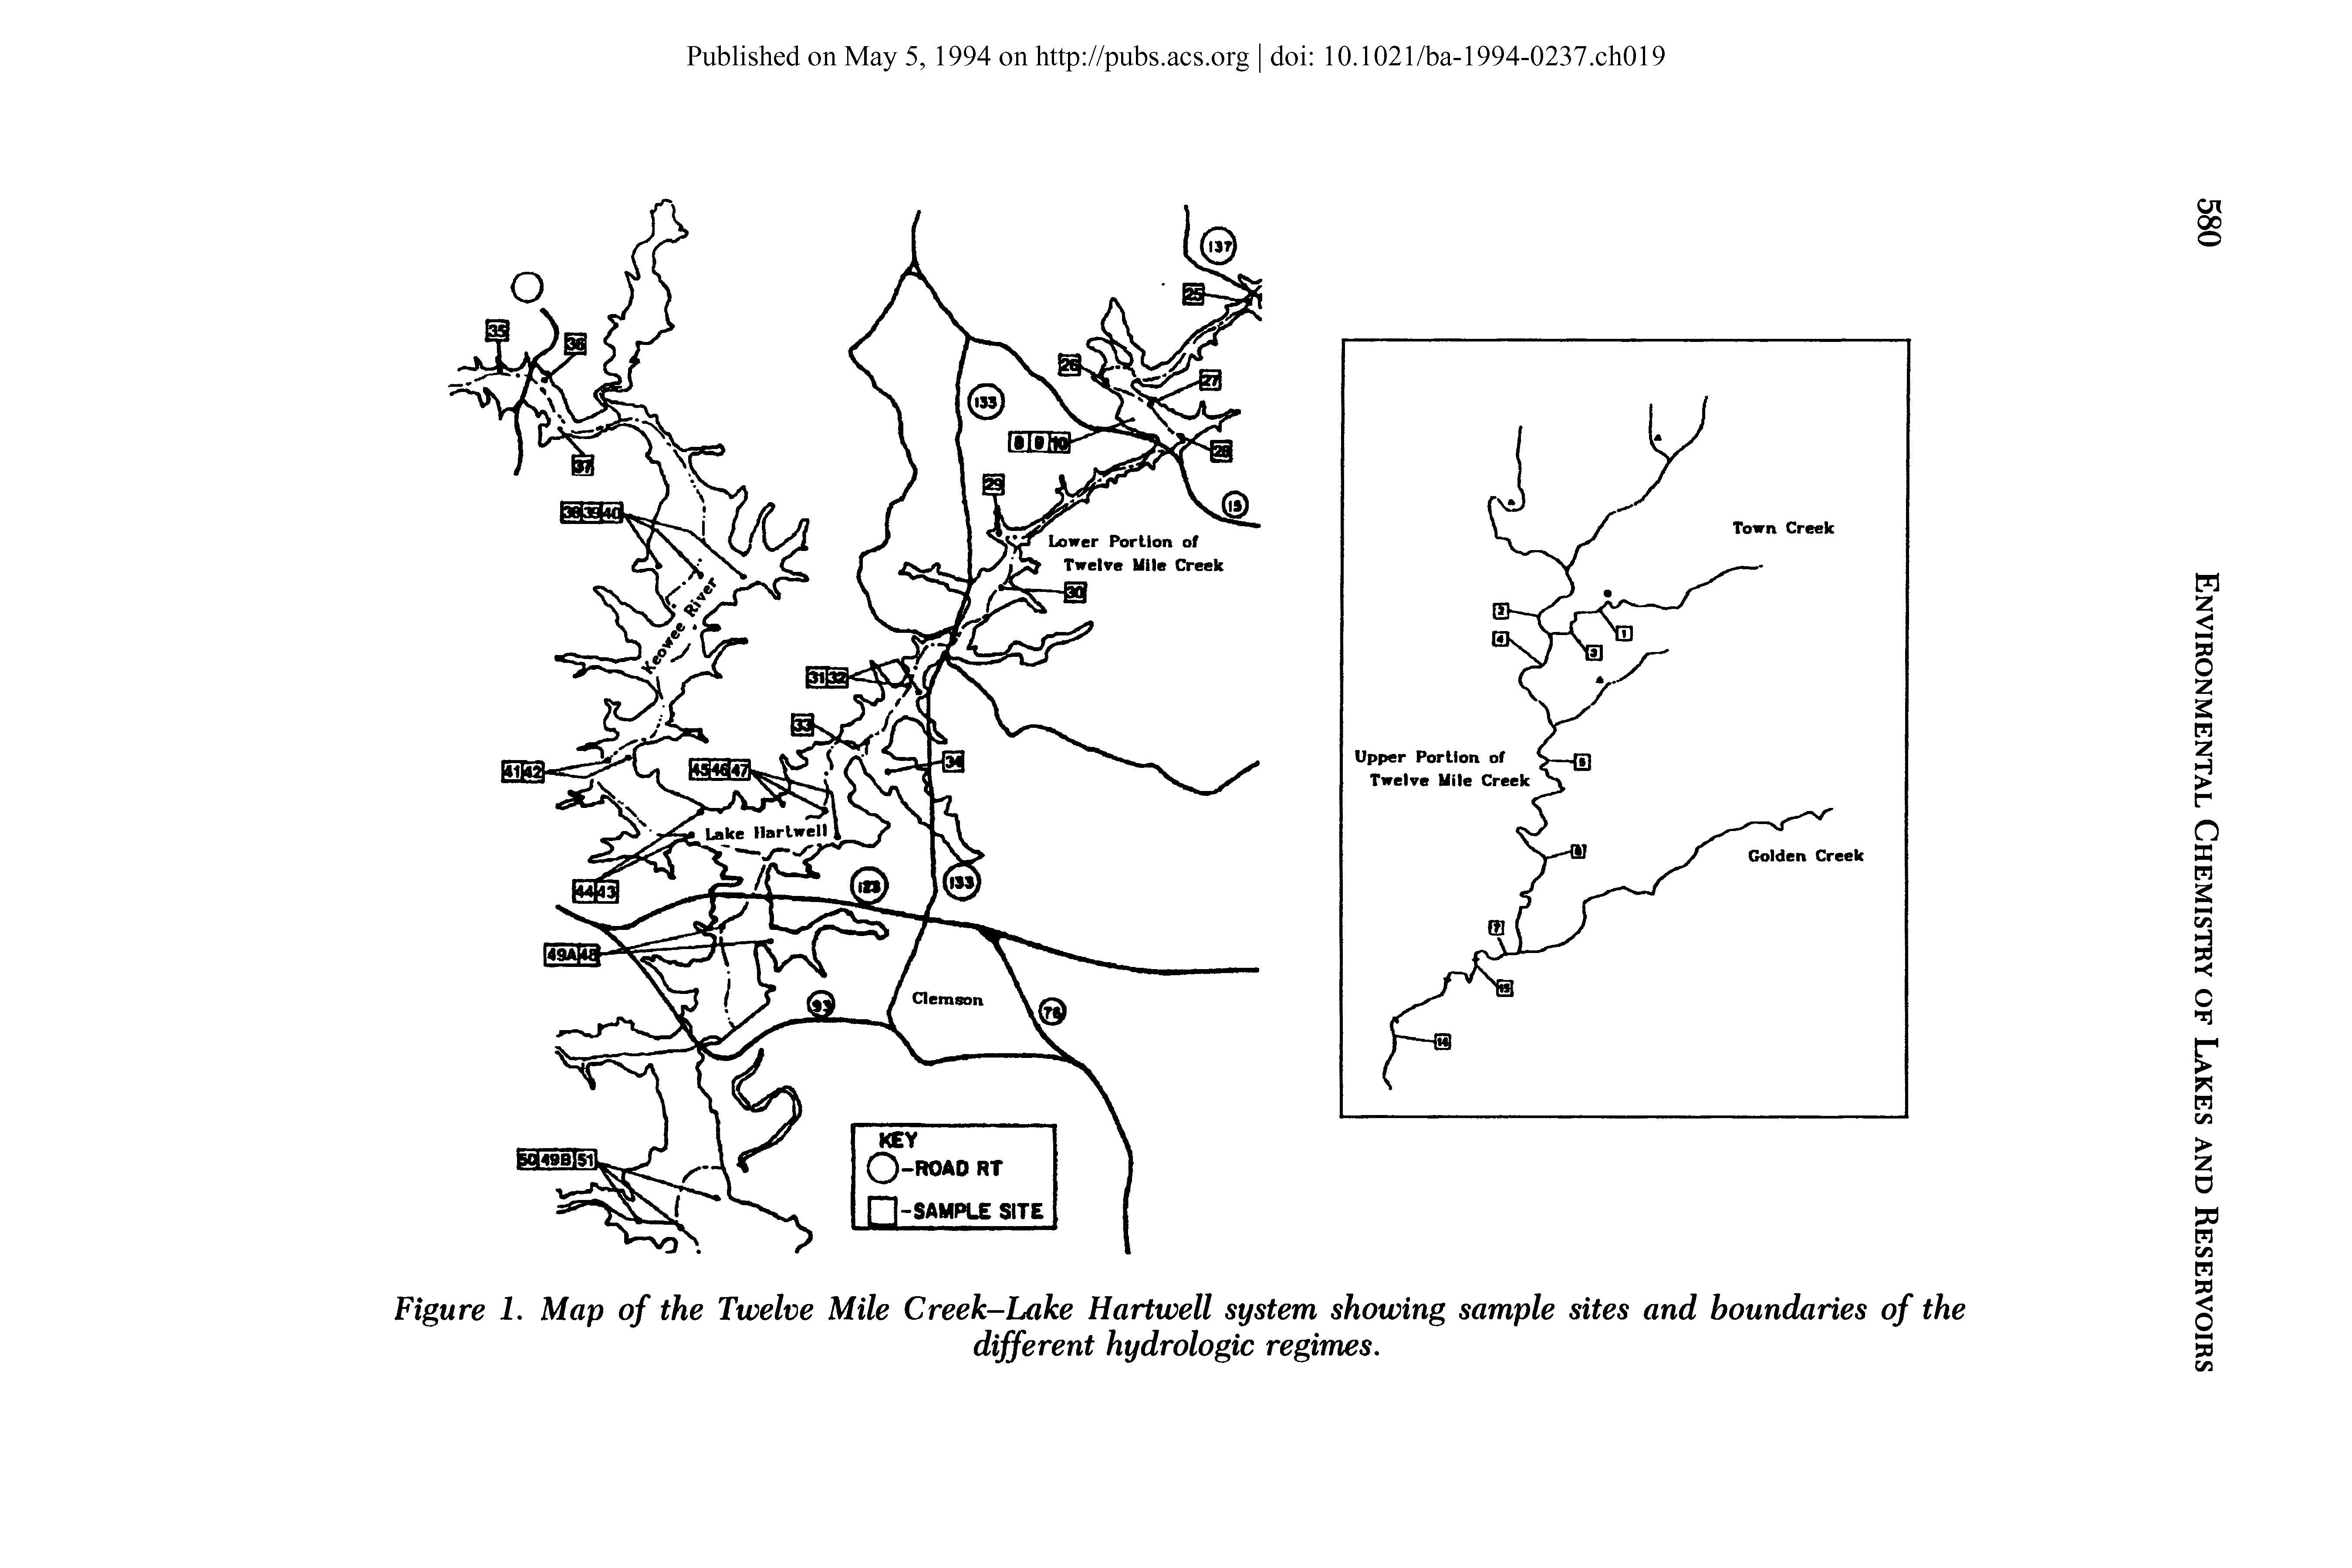 Figure 1. Map of the Twelve Mile Creek-Lake Hartwell system showing sample sites and boundaries of the...